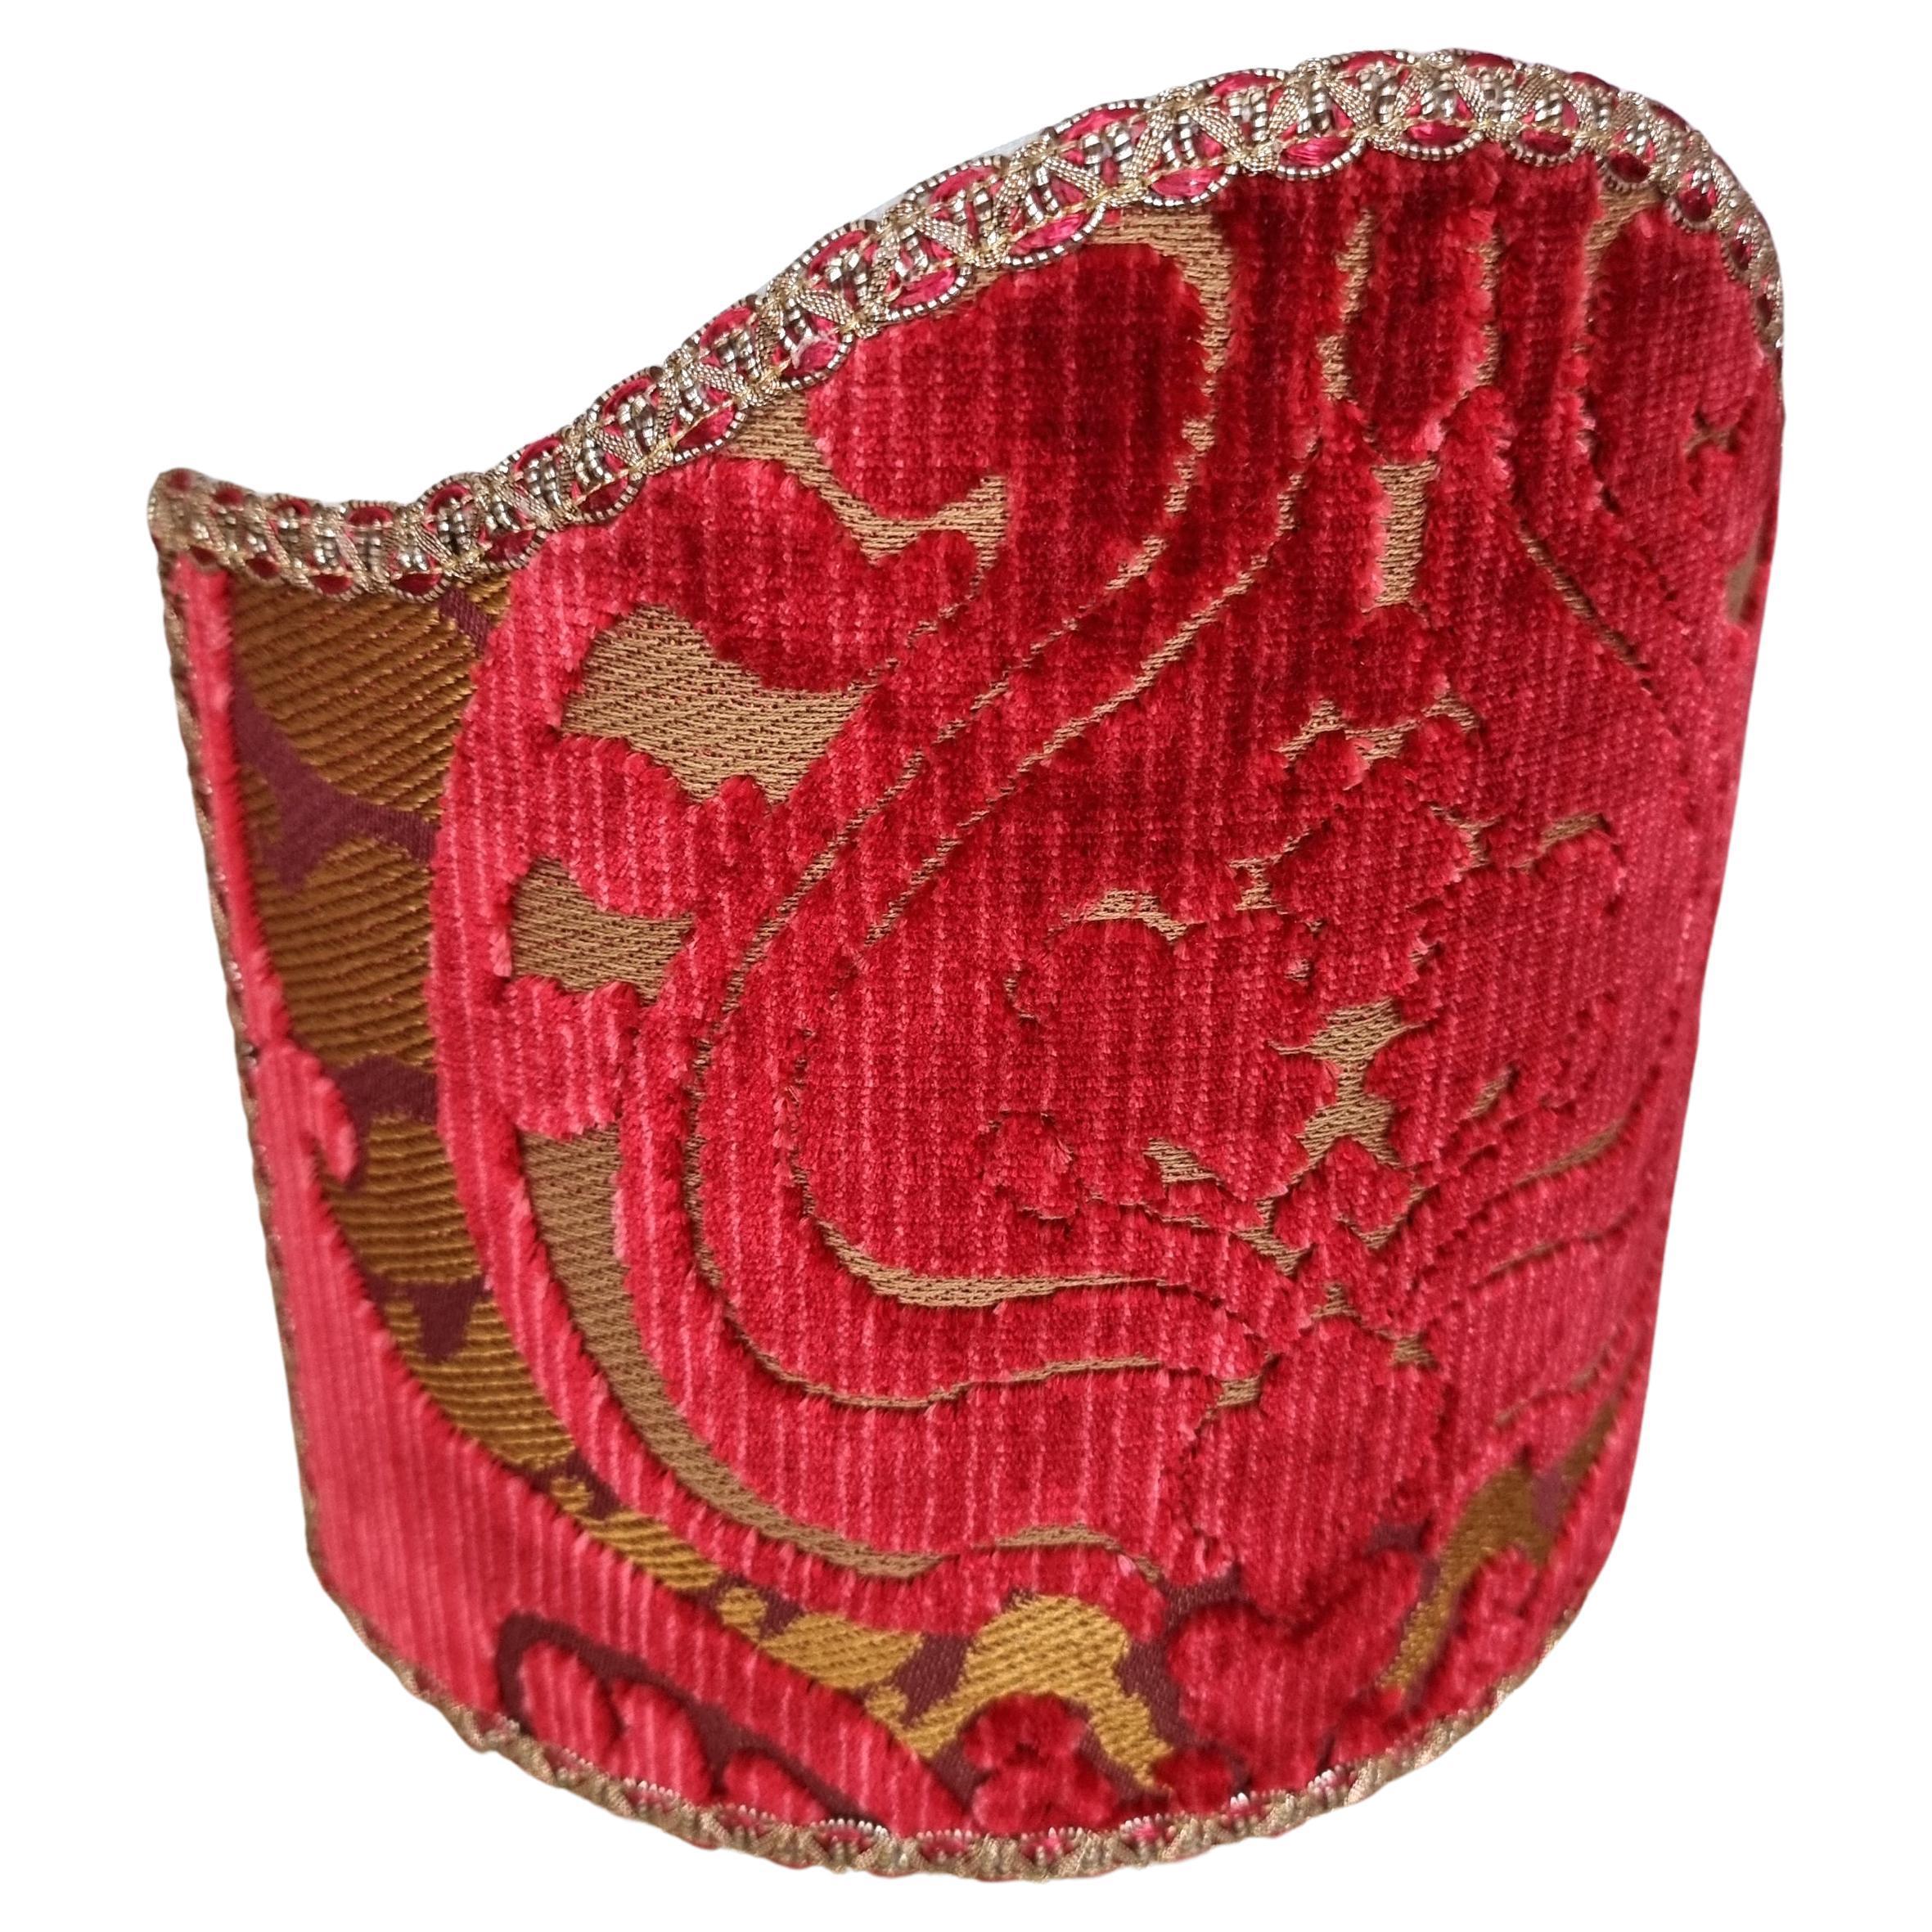 Clip-on Lampshade Luigi Bevilacqua Heddle Velvet Red Torcello Pattern In New Condition For Sale In Venezia, IT